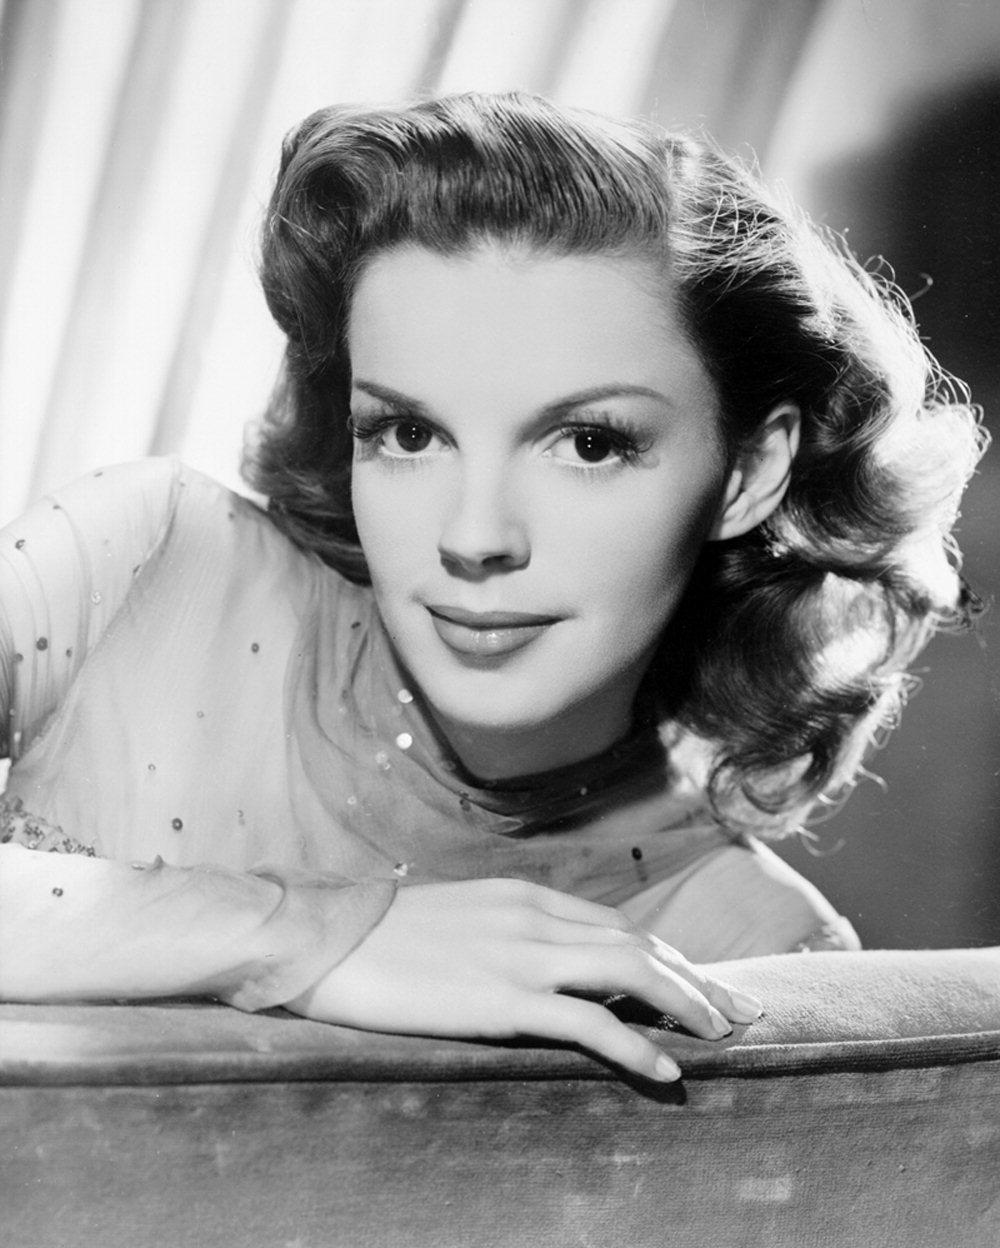  A publicity still of Judy Garland from MGM used in conjunction with promotion of "The Harvey Girls" (1946). (Public Domain)